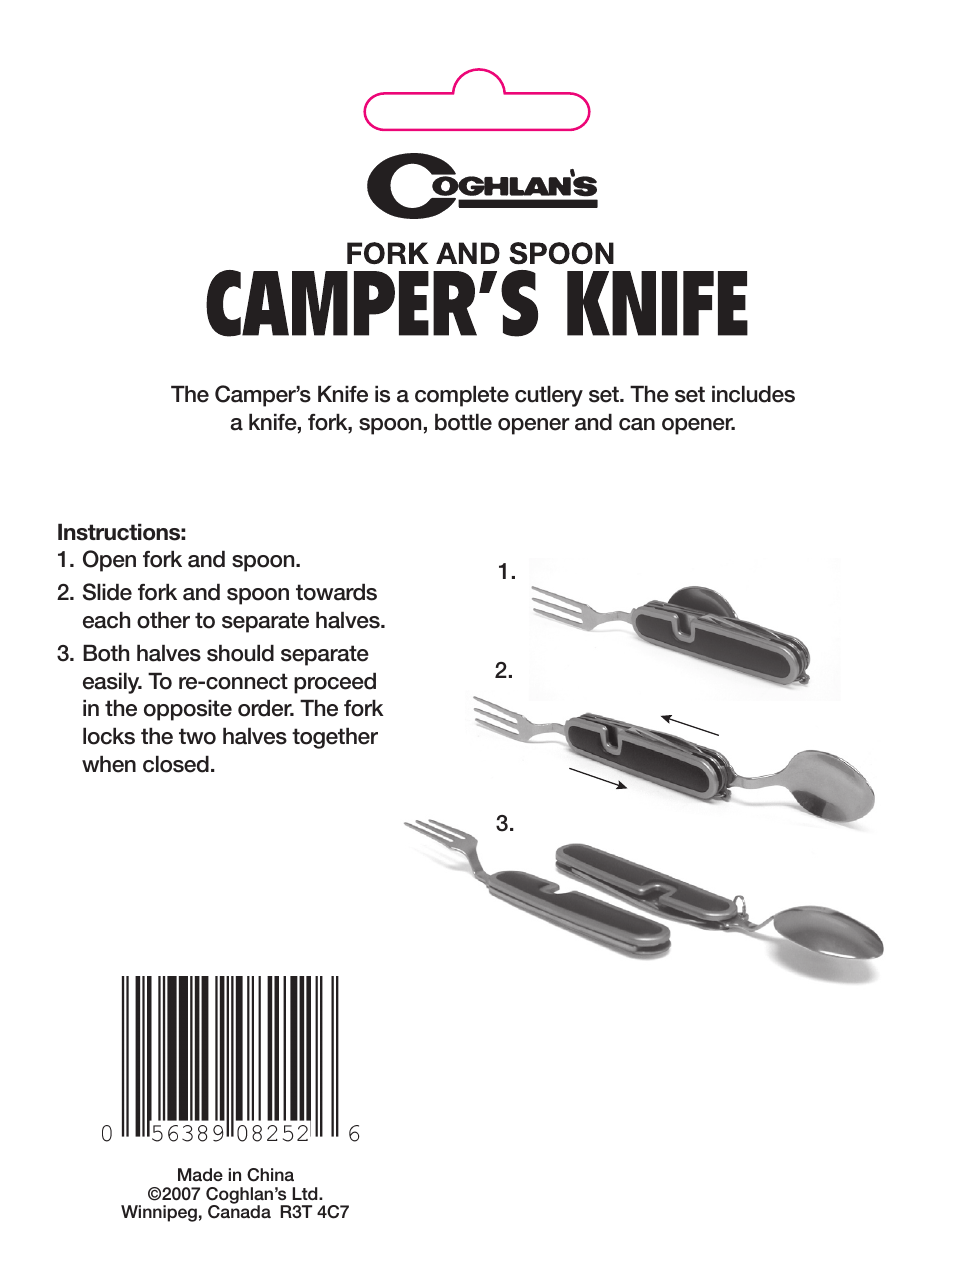 8252 Camper's Knife (fork and spoon)